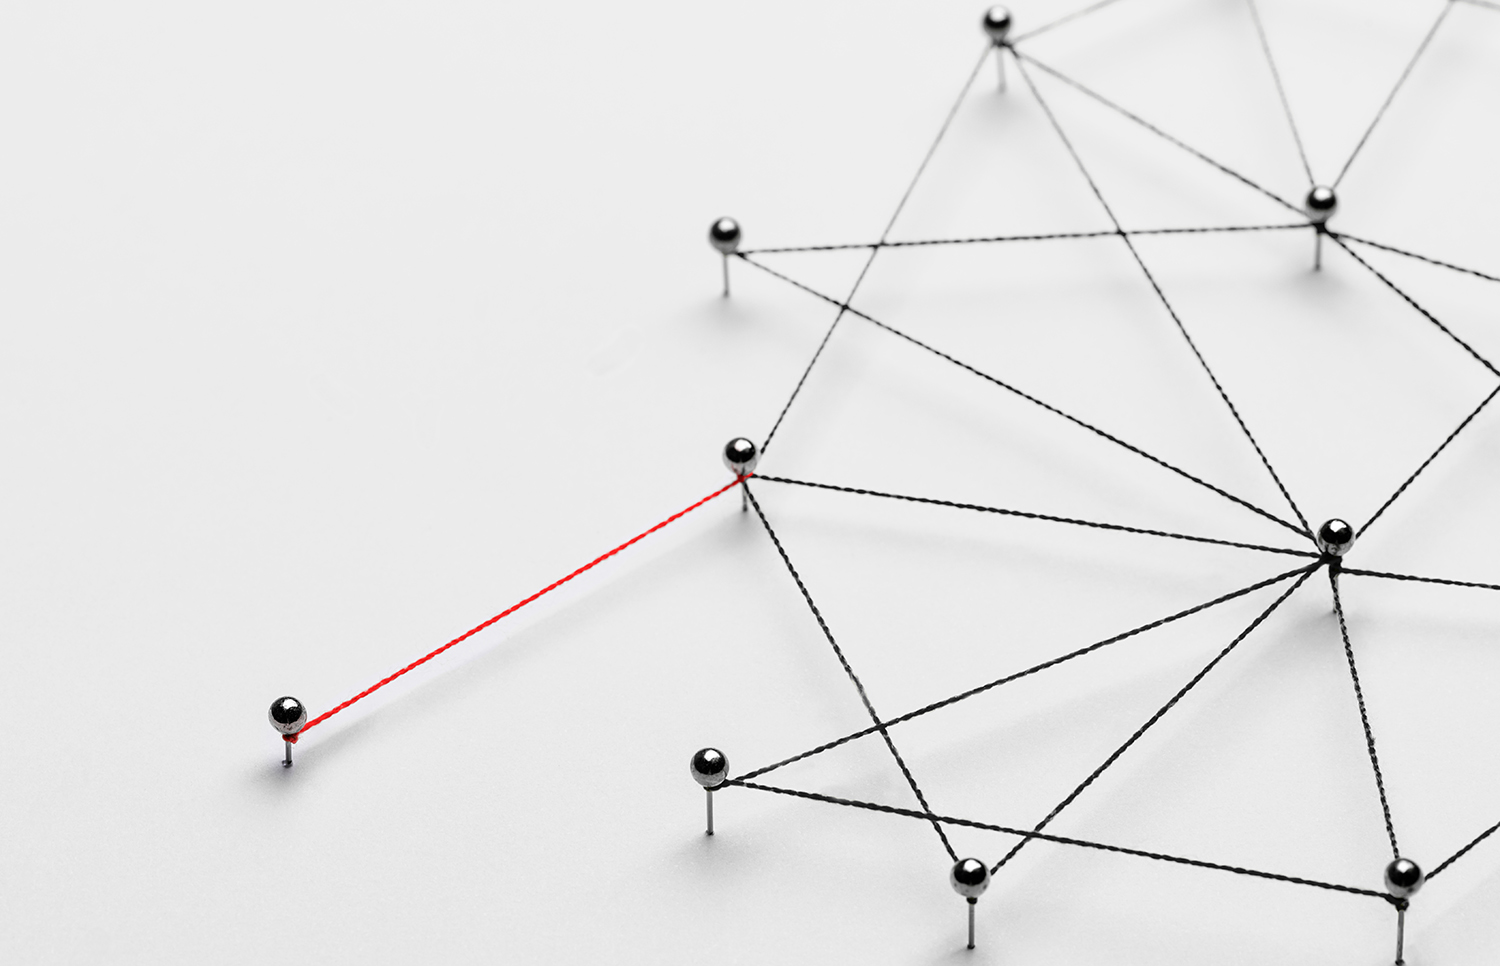 Business network background, connecting dots, technology design